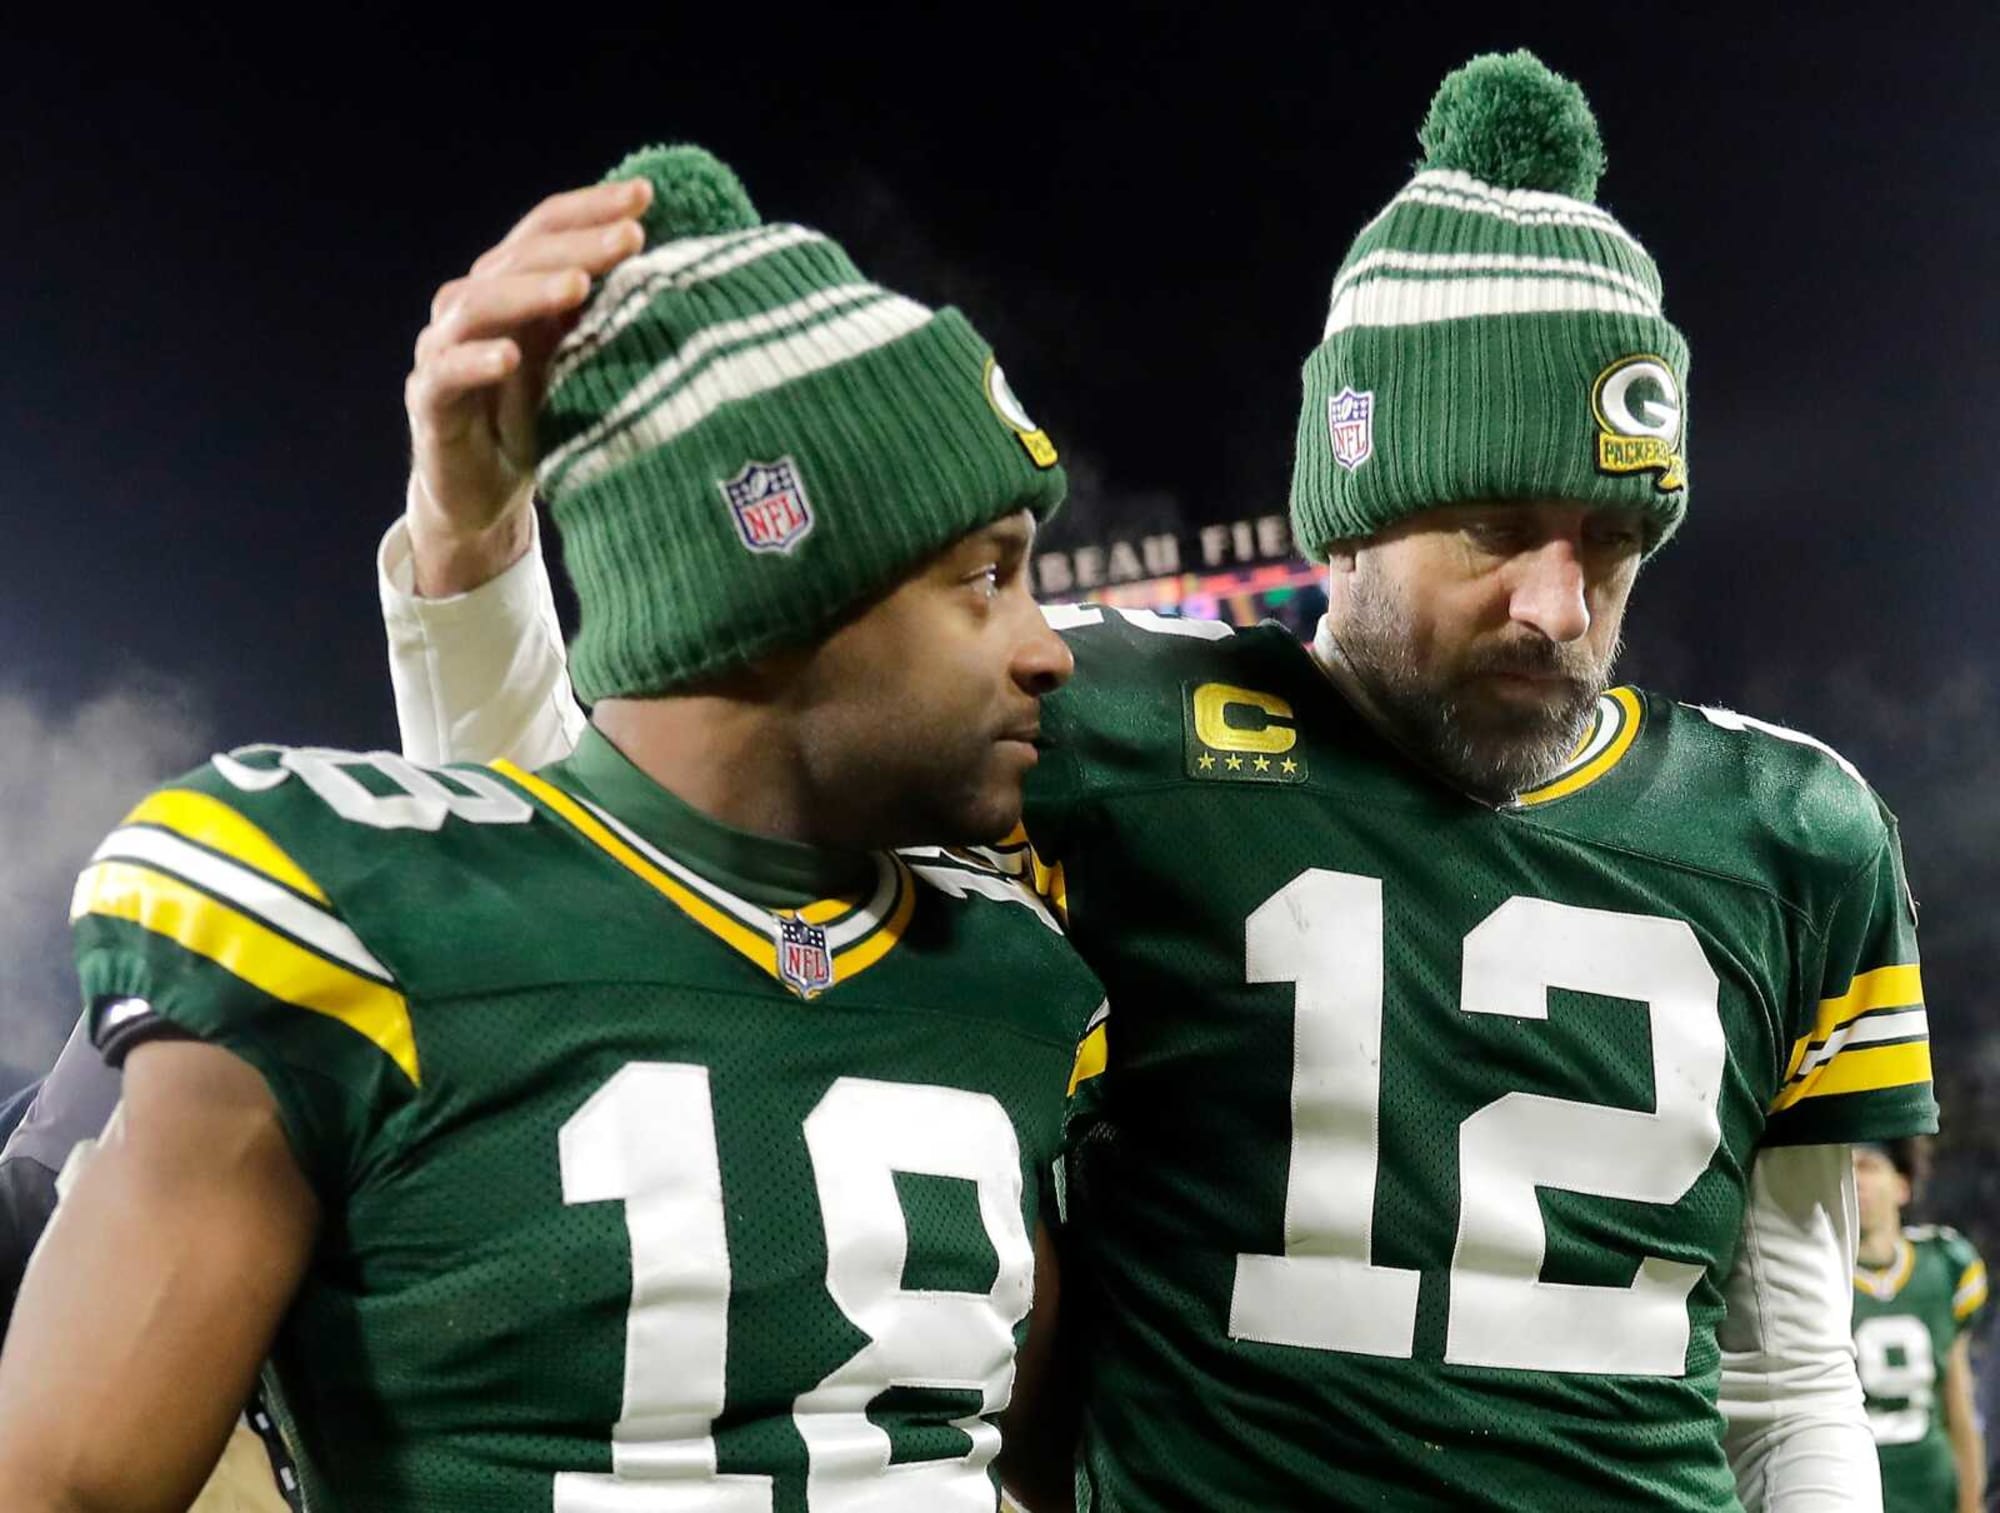 Randall Cobb addresses retirement speculation for himself, Aaron Rodgers